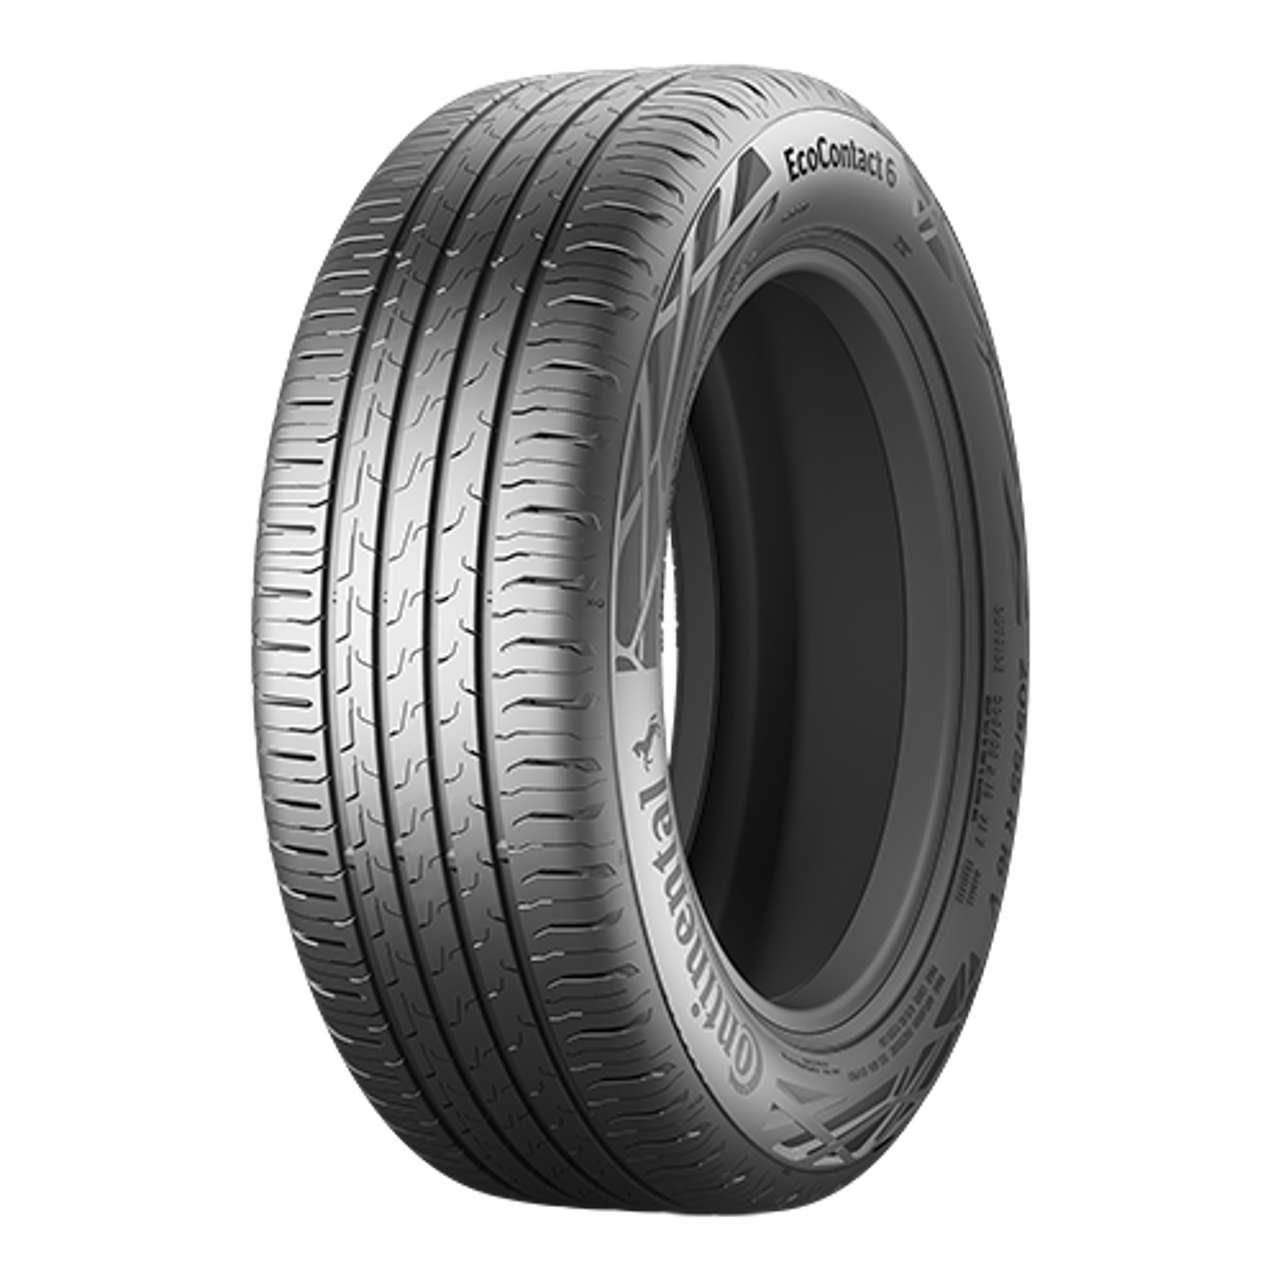 CONTINENTAL ECOCONTACT 6 (EVc) 175/65R15 84H